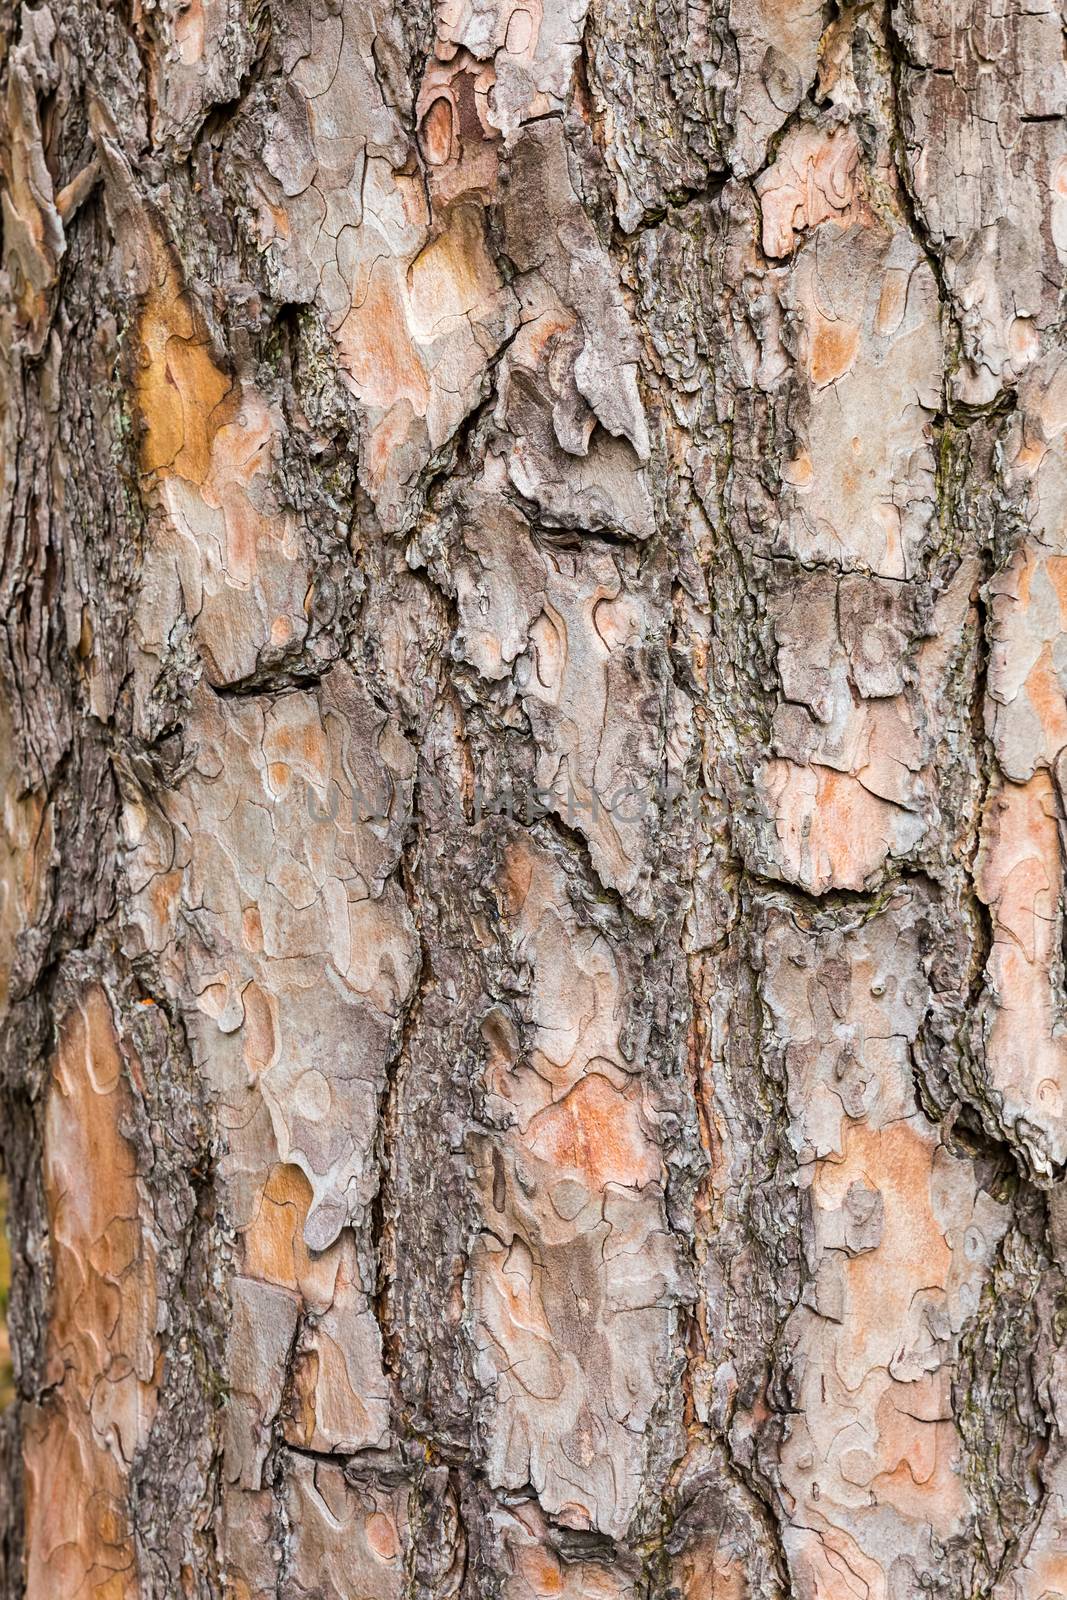 Bark on trunk of Scotch pine tree as background